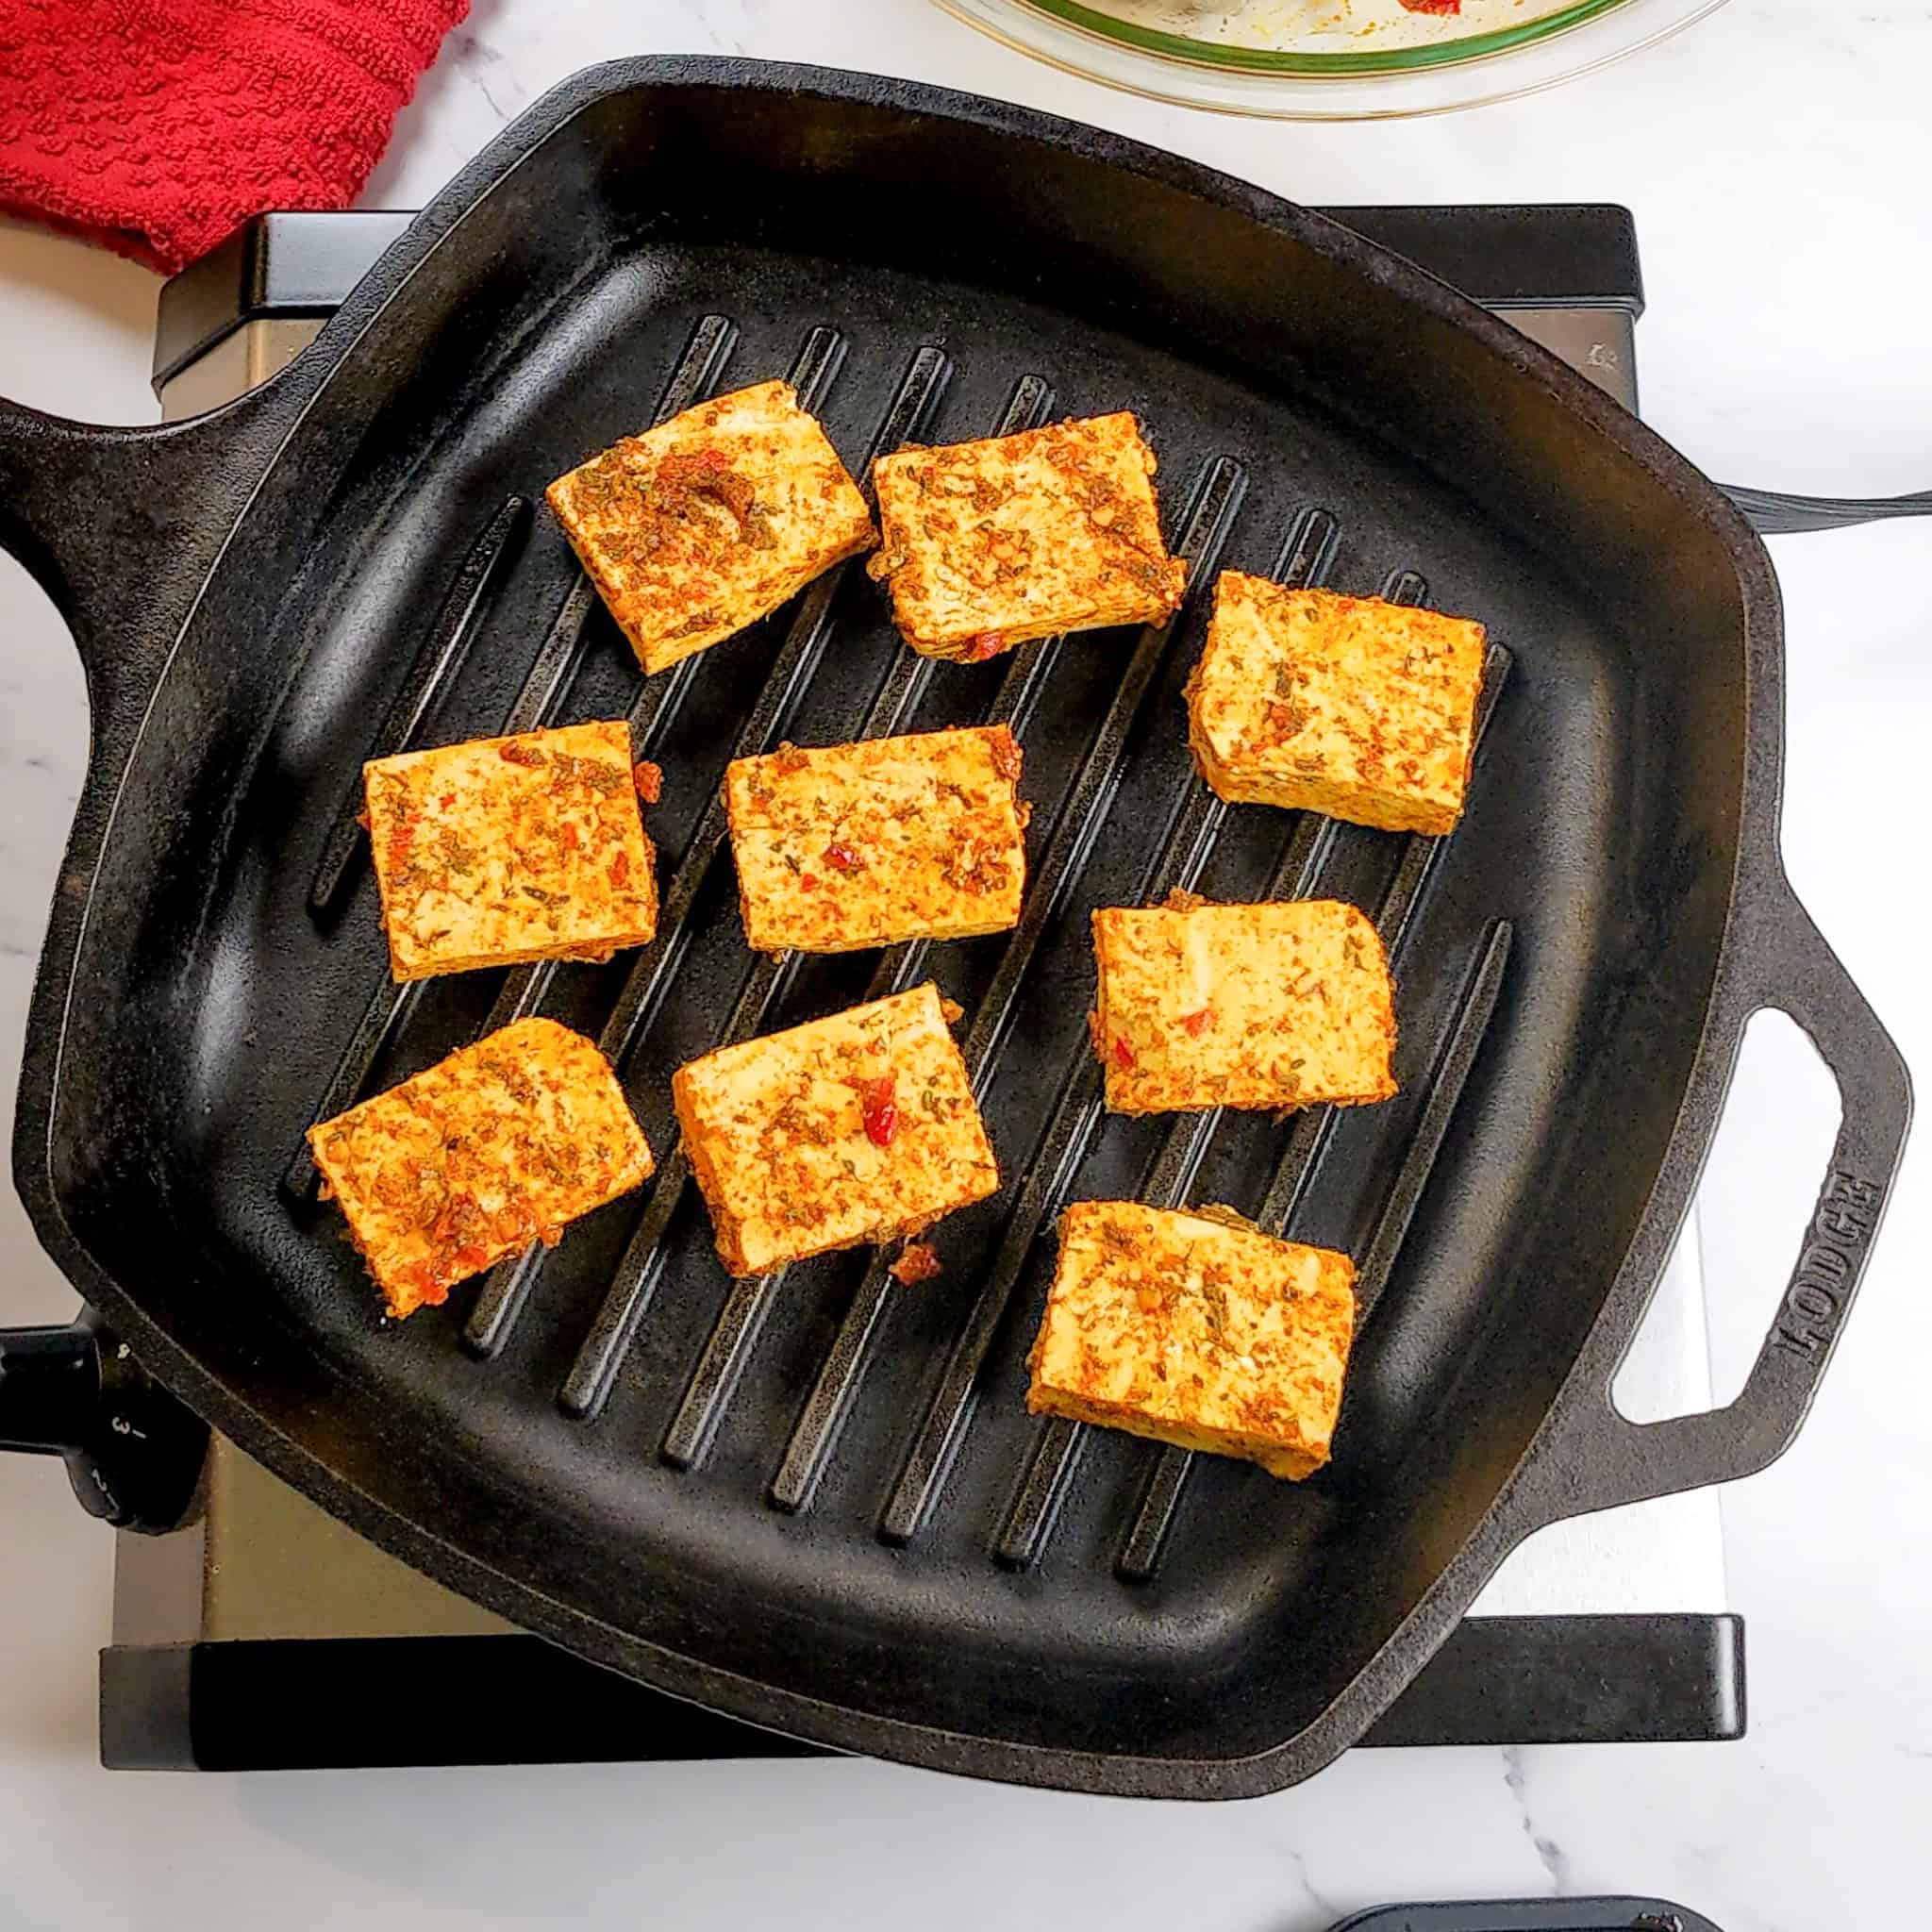 marinated tofu grilling in a grill pan.